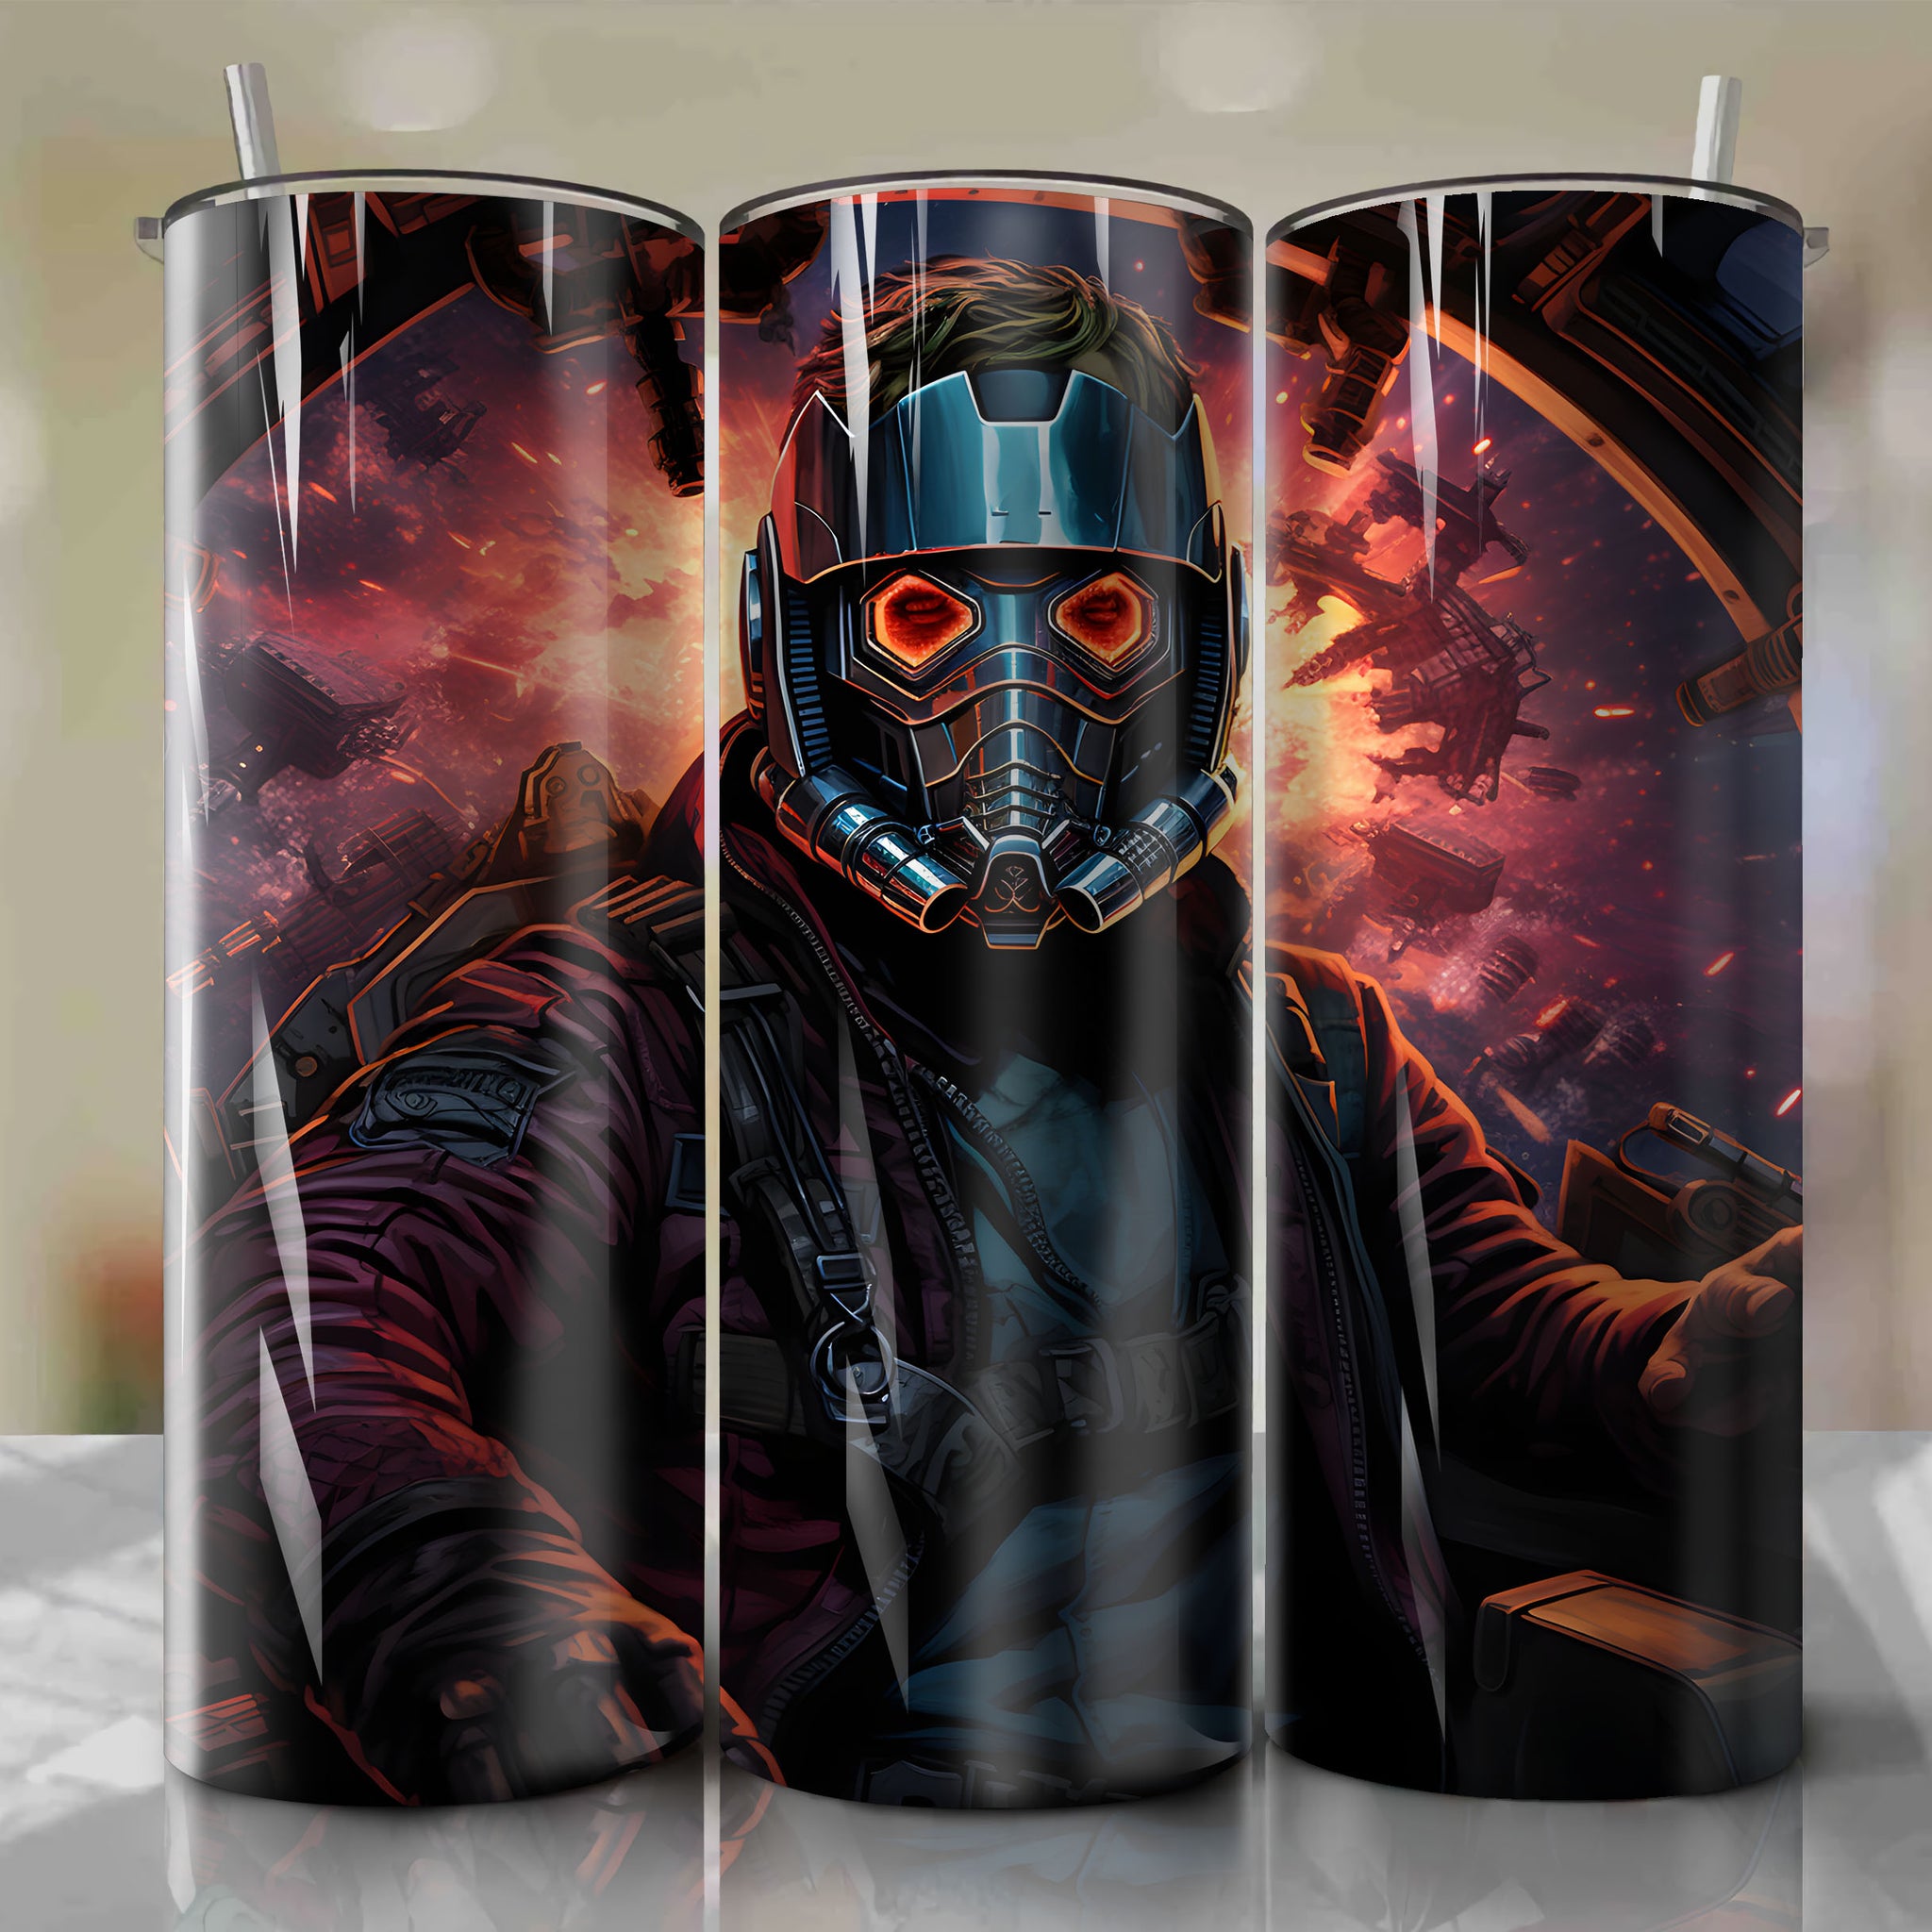 20 Oz Tumbler Wrap - Futuristic Star-Lord Art of Cosmic Exploration with Wit and Charisma
